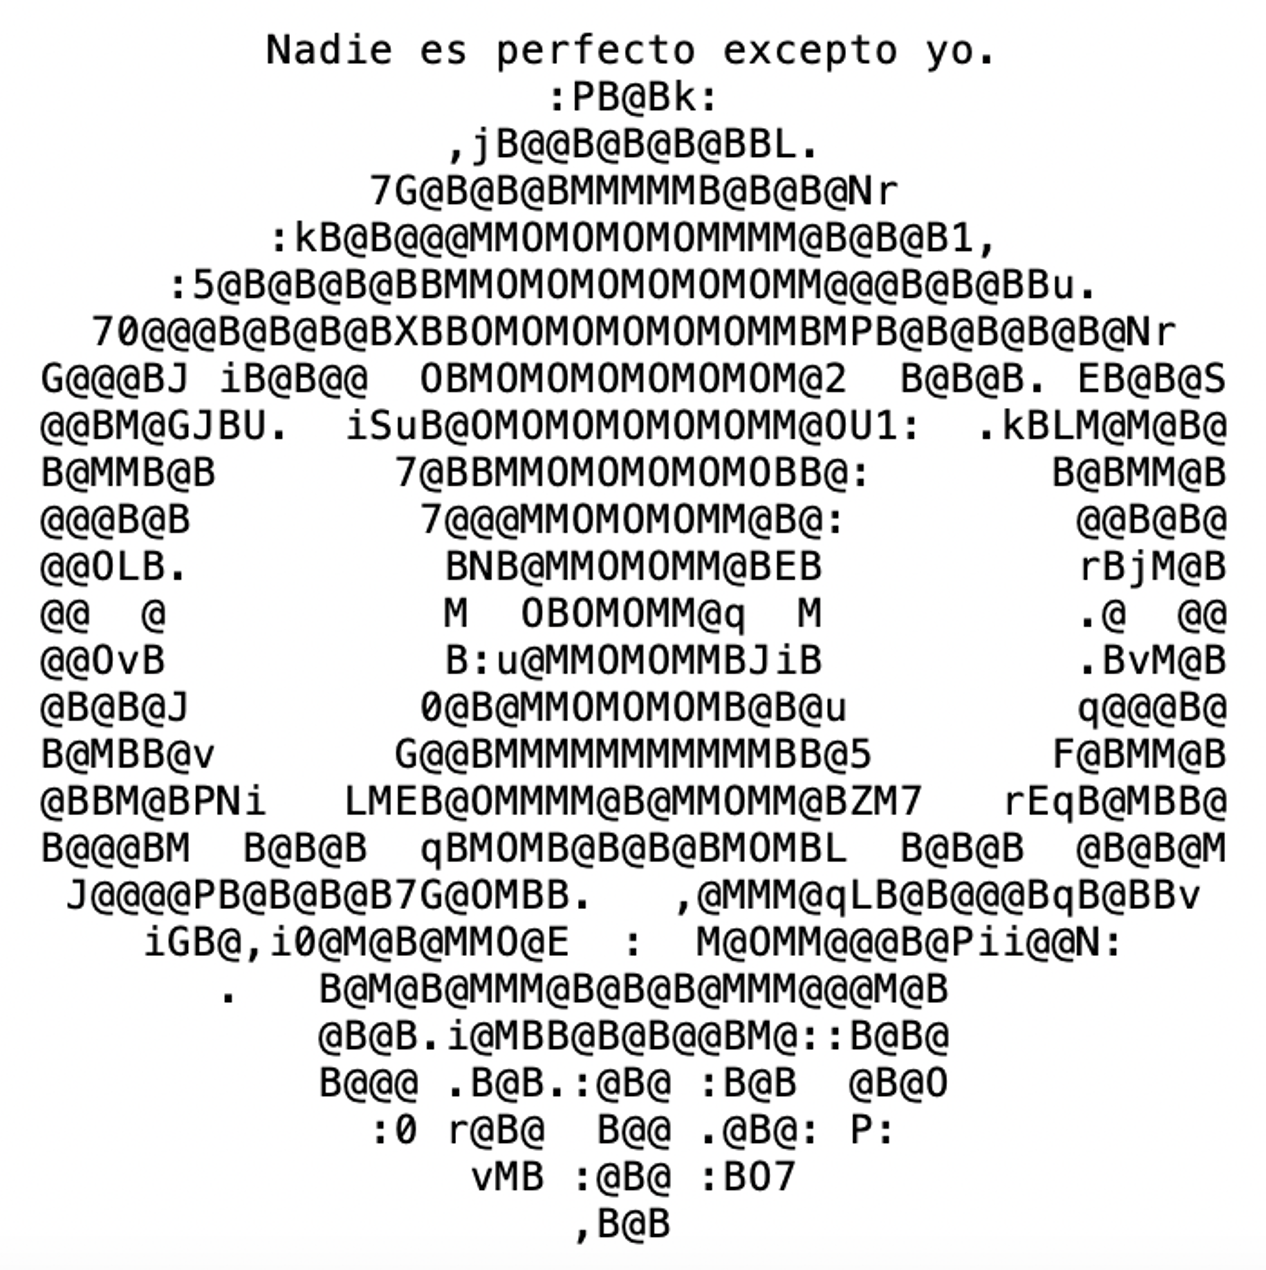 Malware author mark “No one is perfect except me.”